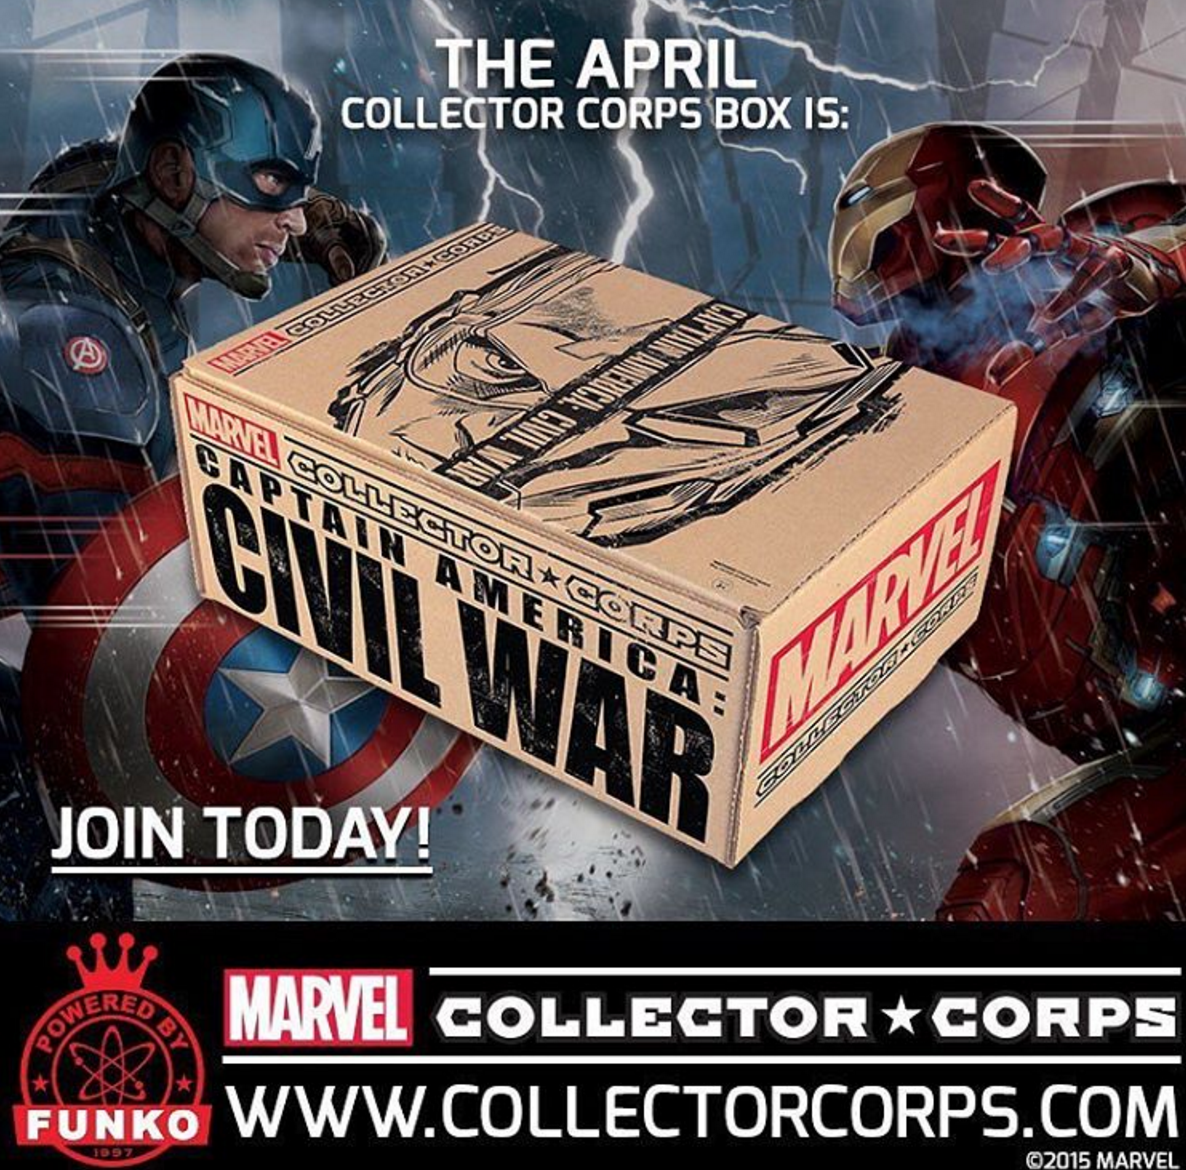 Marvel Collector Corps April 2016 Box FULL SPOILERS! My